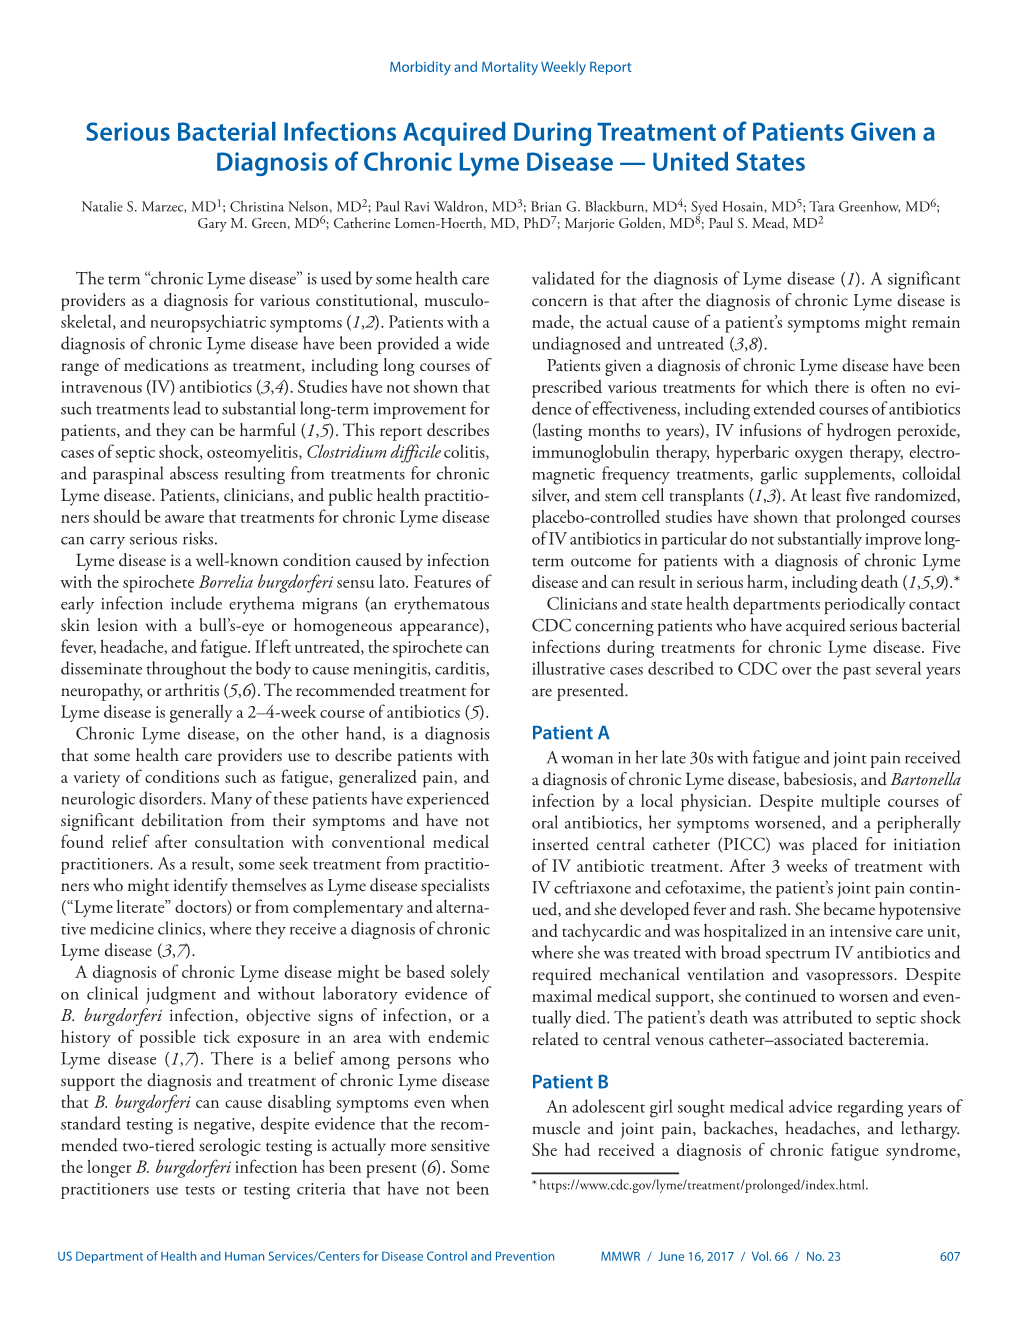 Serious Bacterial Infections Acquired During Treatment of Patients Given a Diagnosis of Chronic Lyme Disease — United States